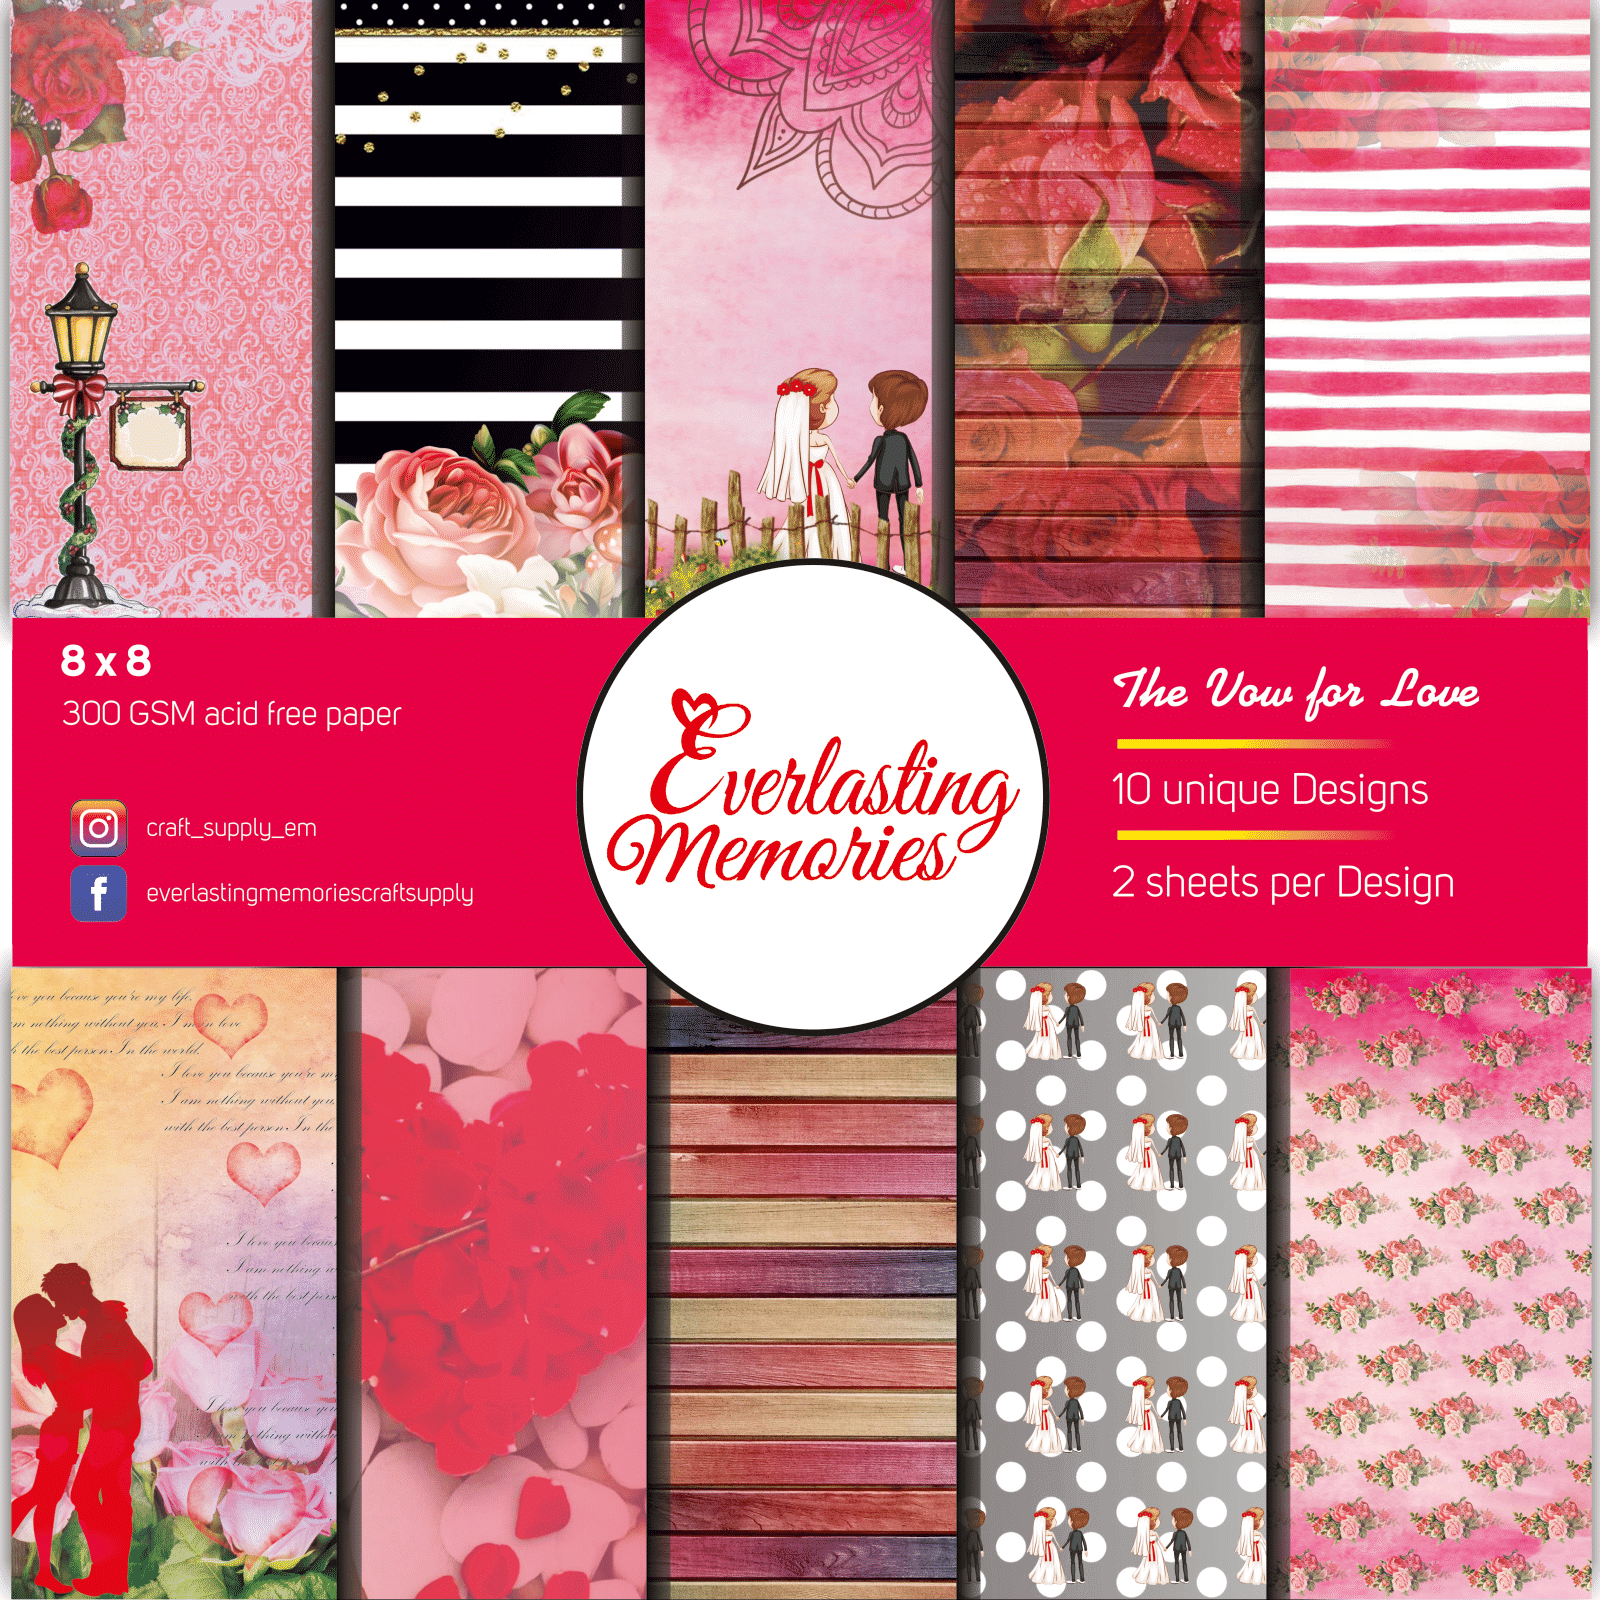 Scrapbook Collection Kit | Motif Sheets | 12×12 Love-Themed Paper Collection | Premium Quality Papers